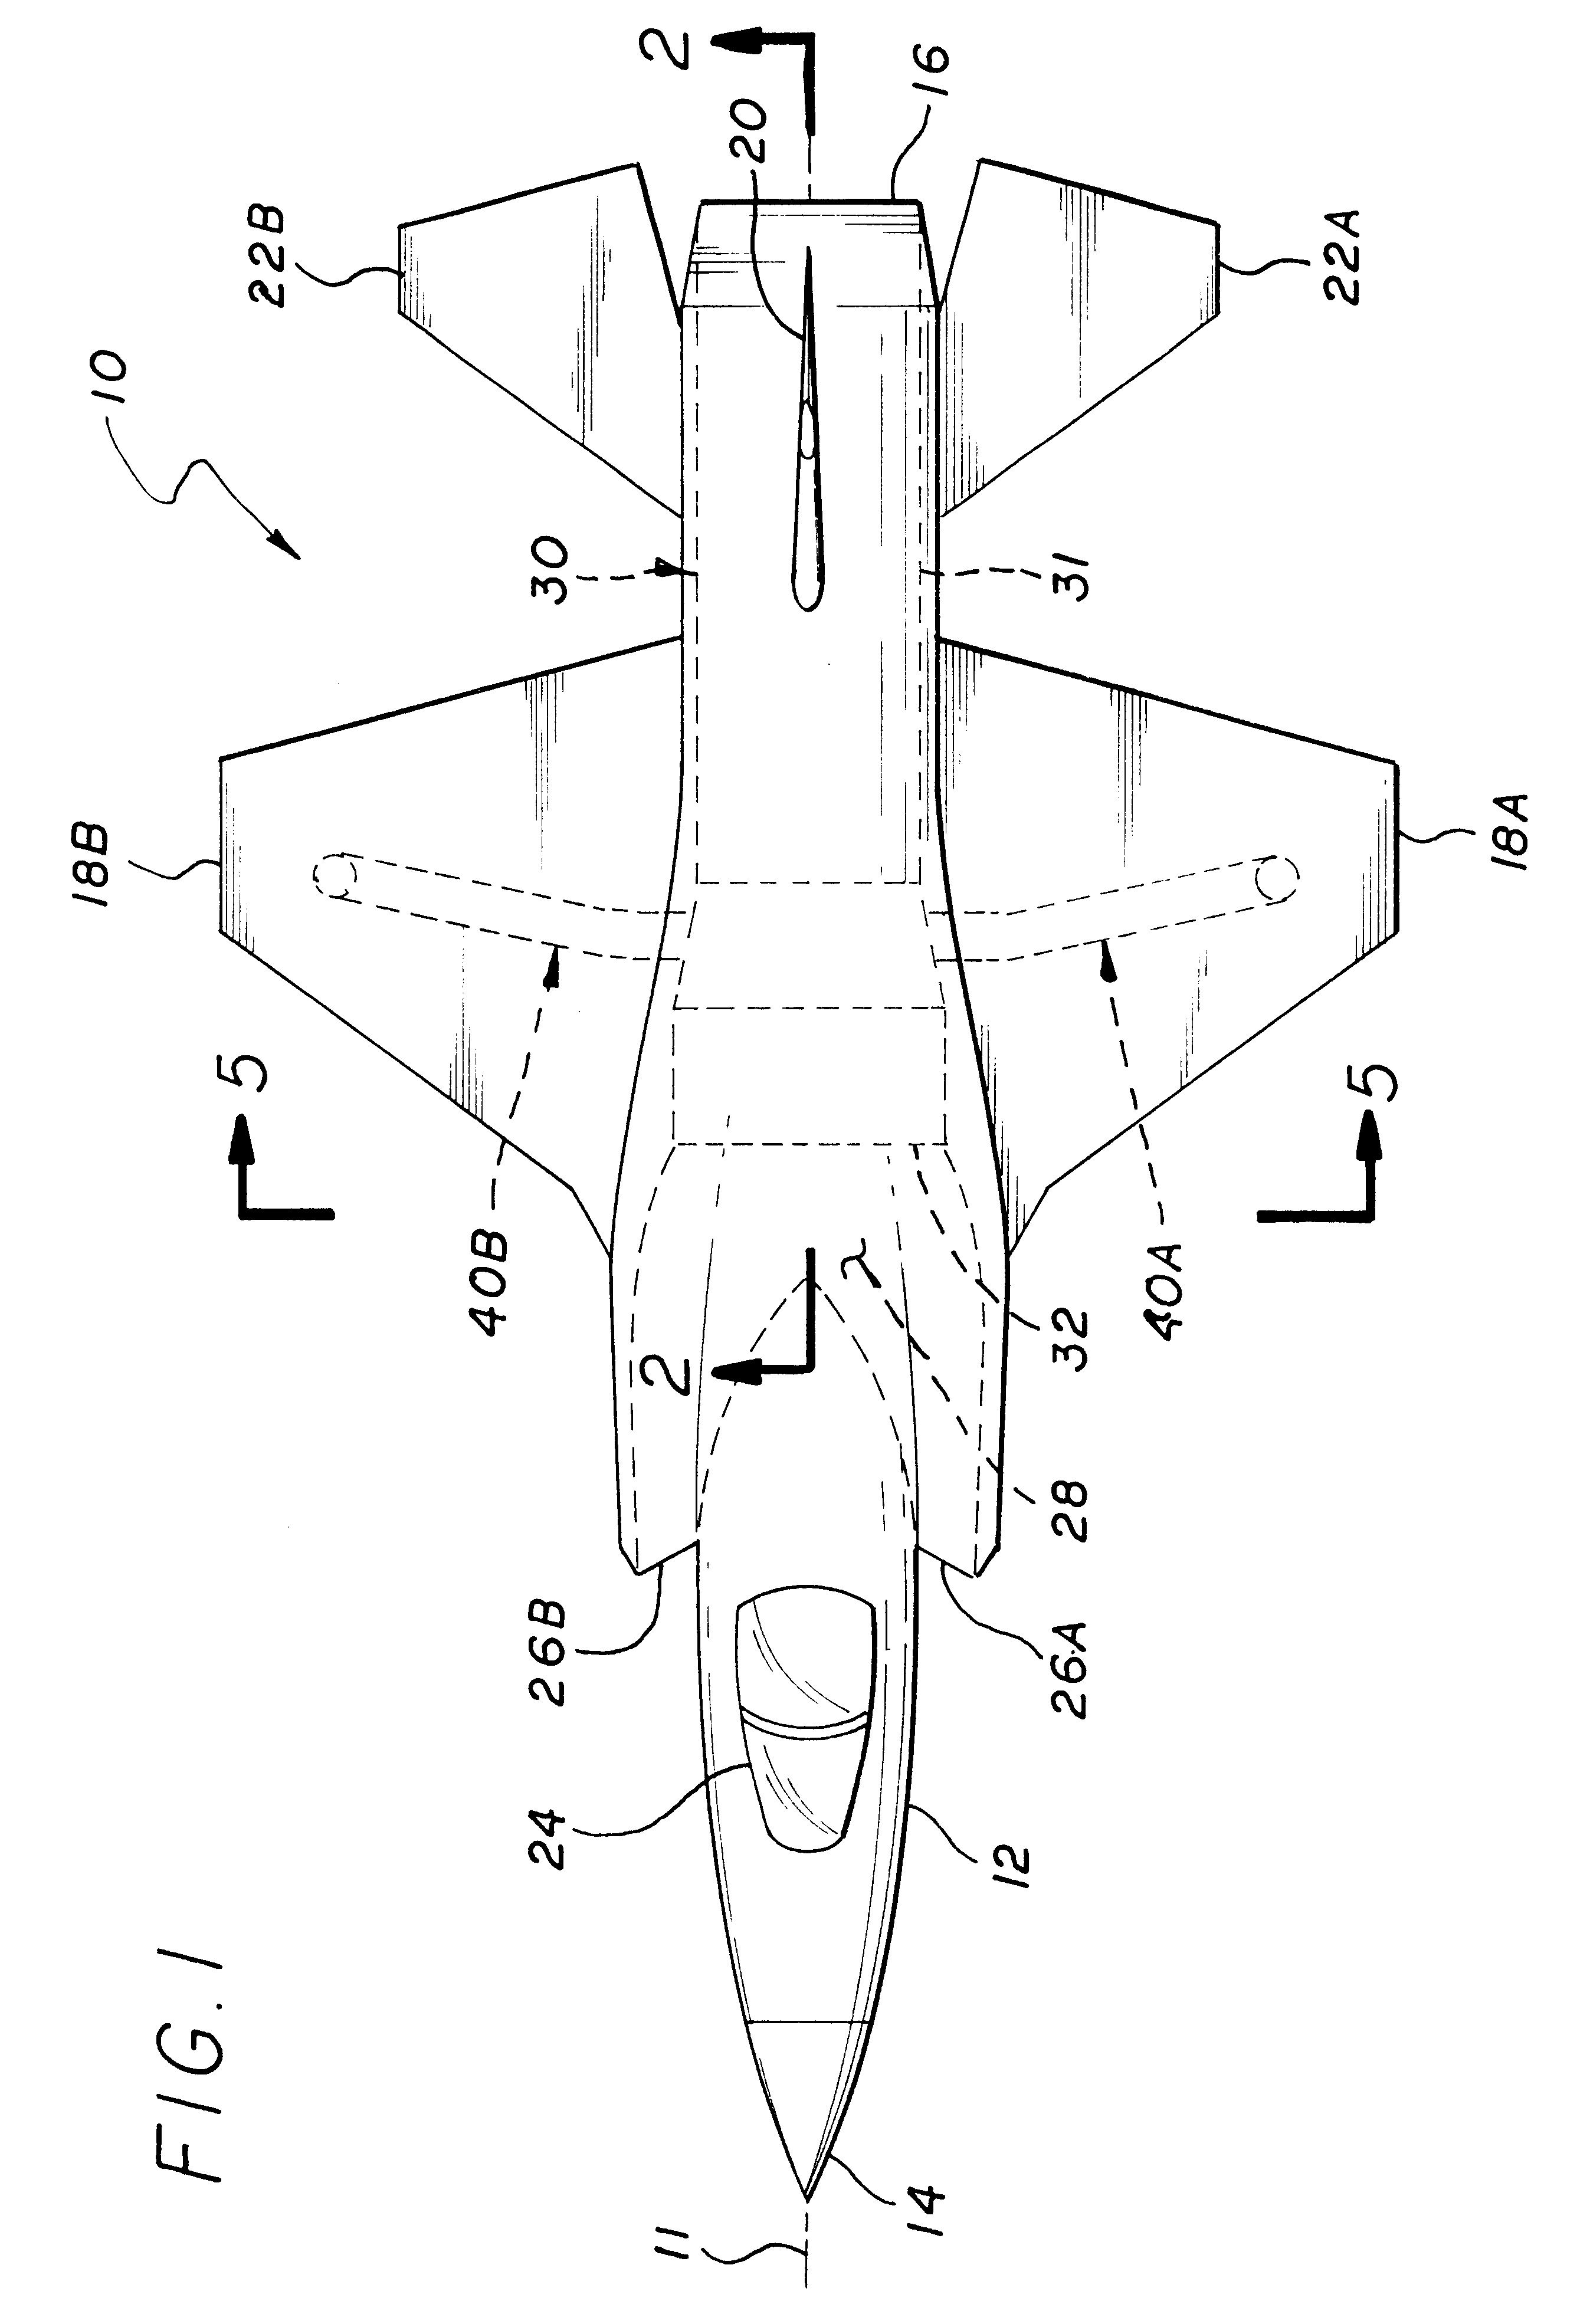 Propulsion system for a vertical and short takeoff and landing aircraft